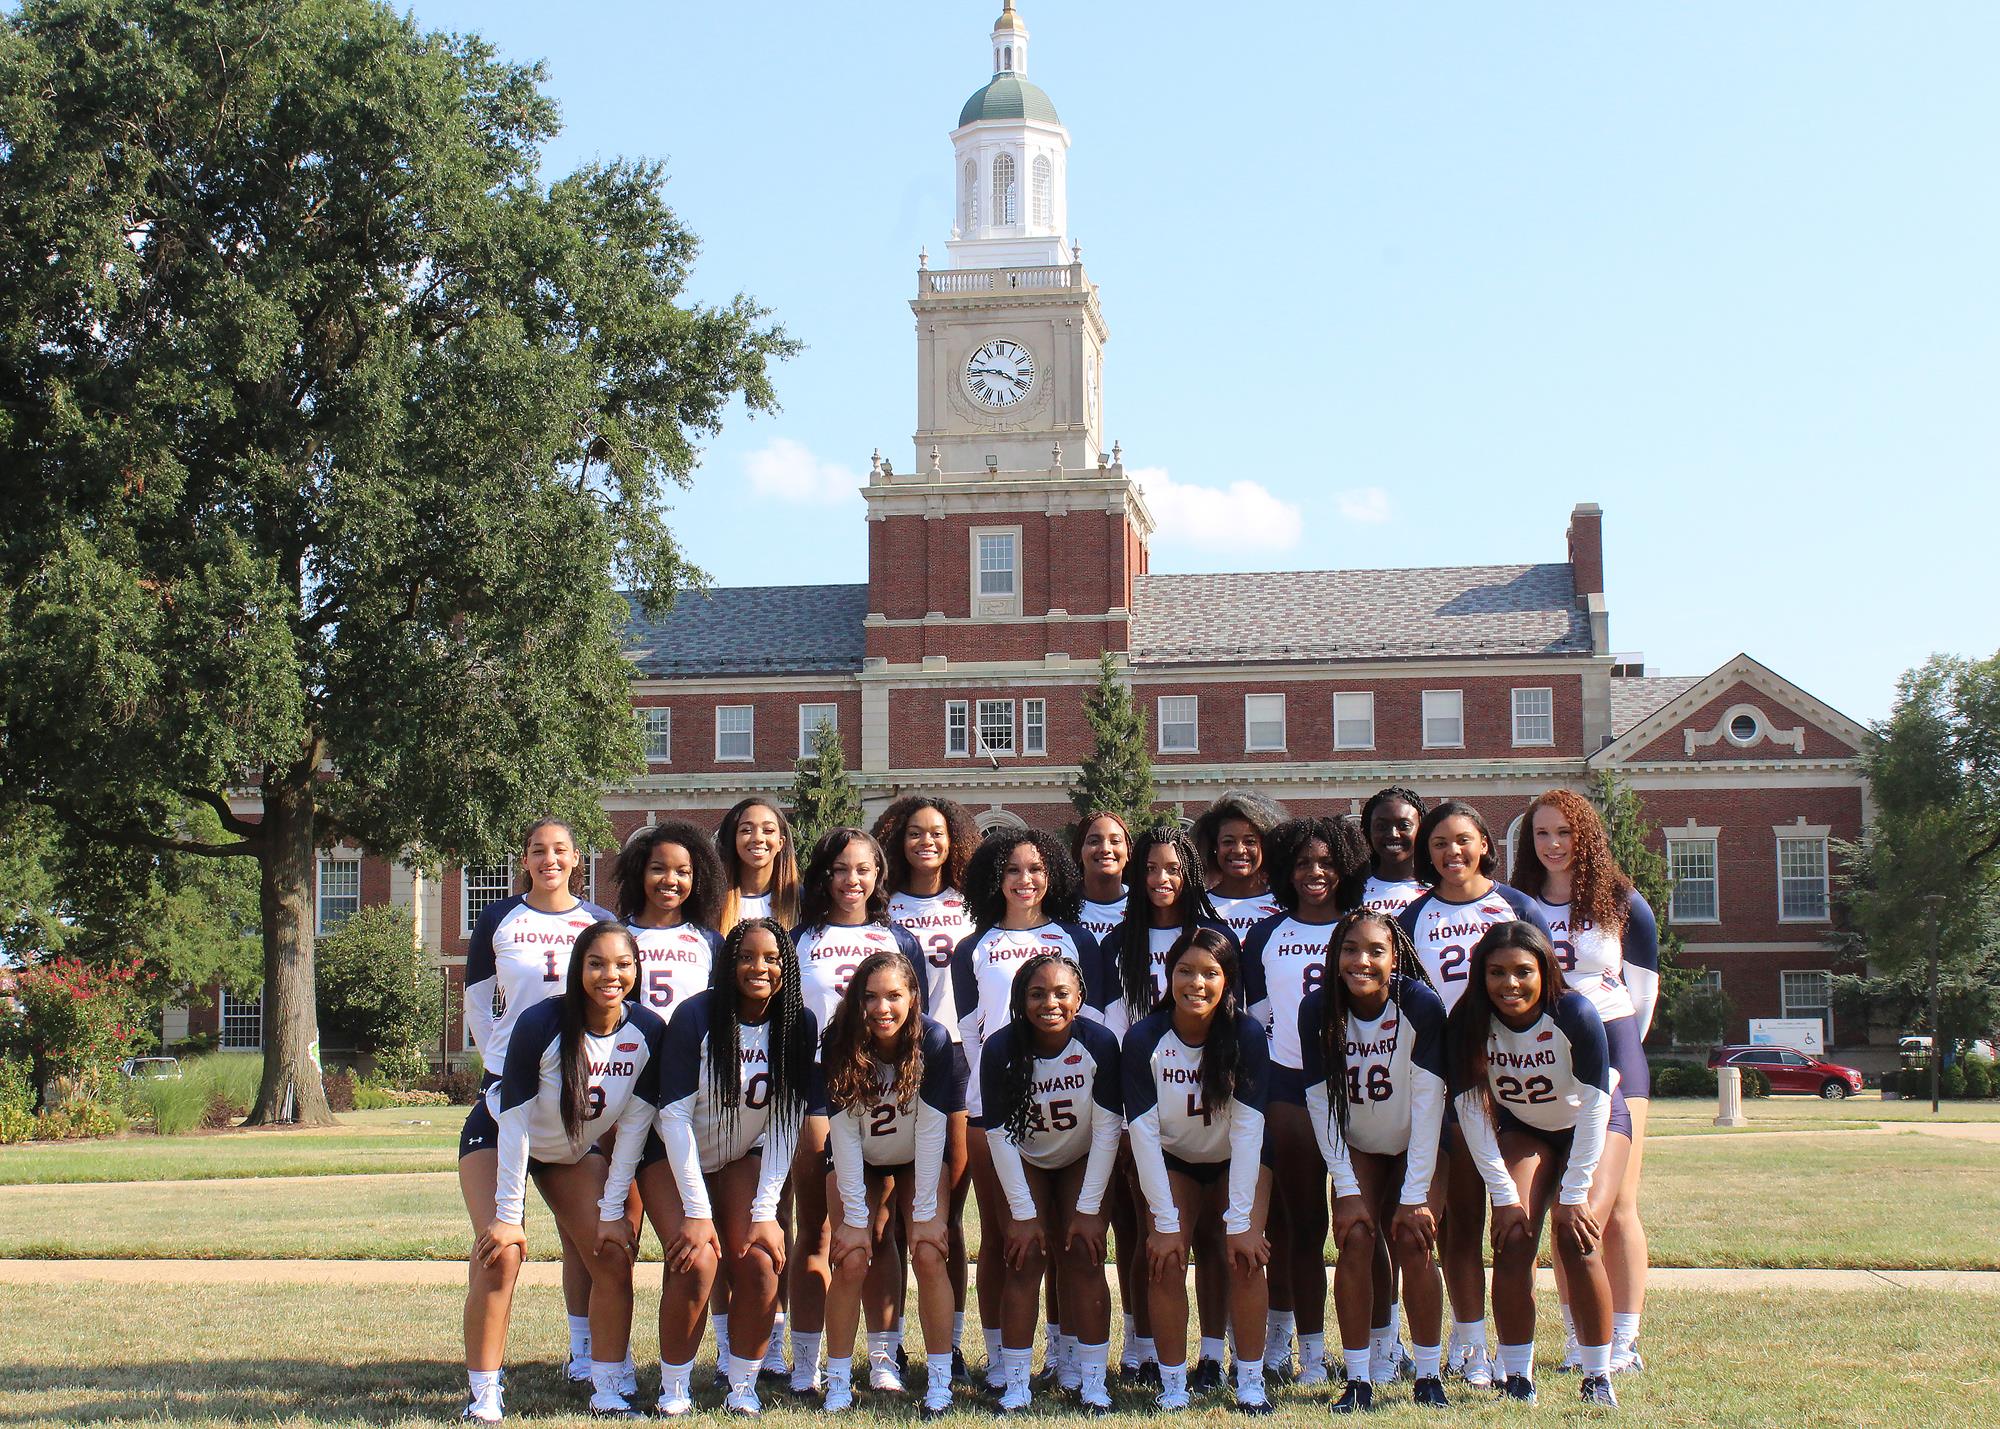 Howard’s Women Volleyball Team Leads Voter Registration Initiative